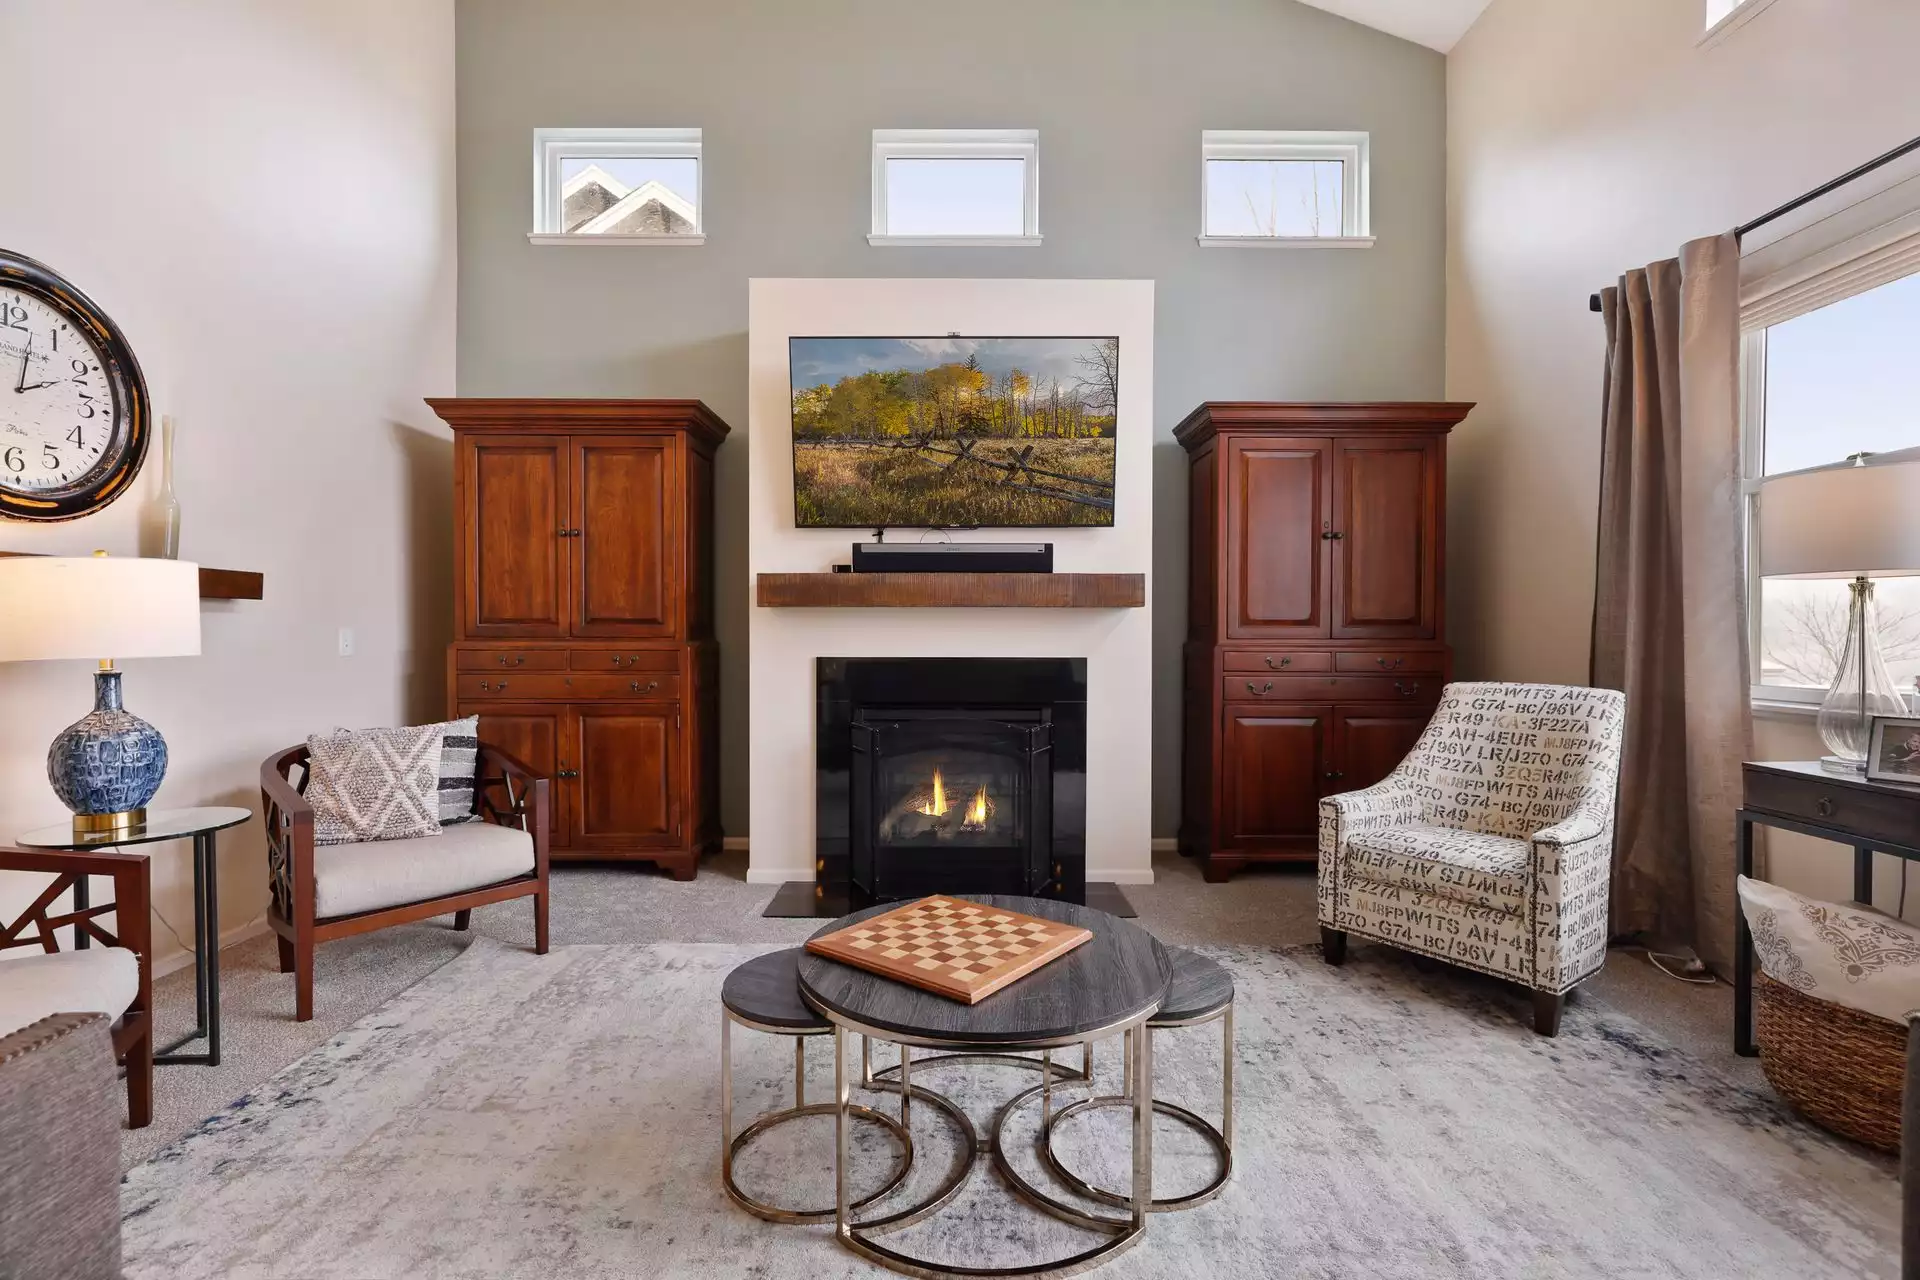 Woodbury Home For Sale Fireplace Media Wall with Windows Above